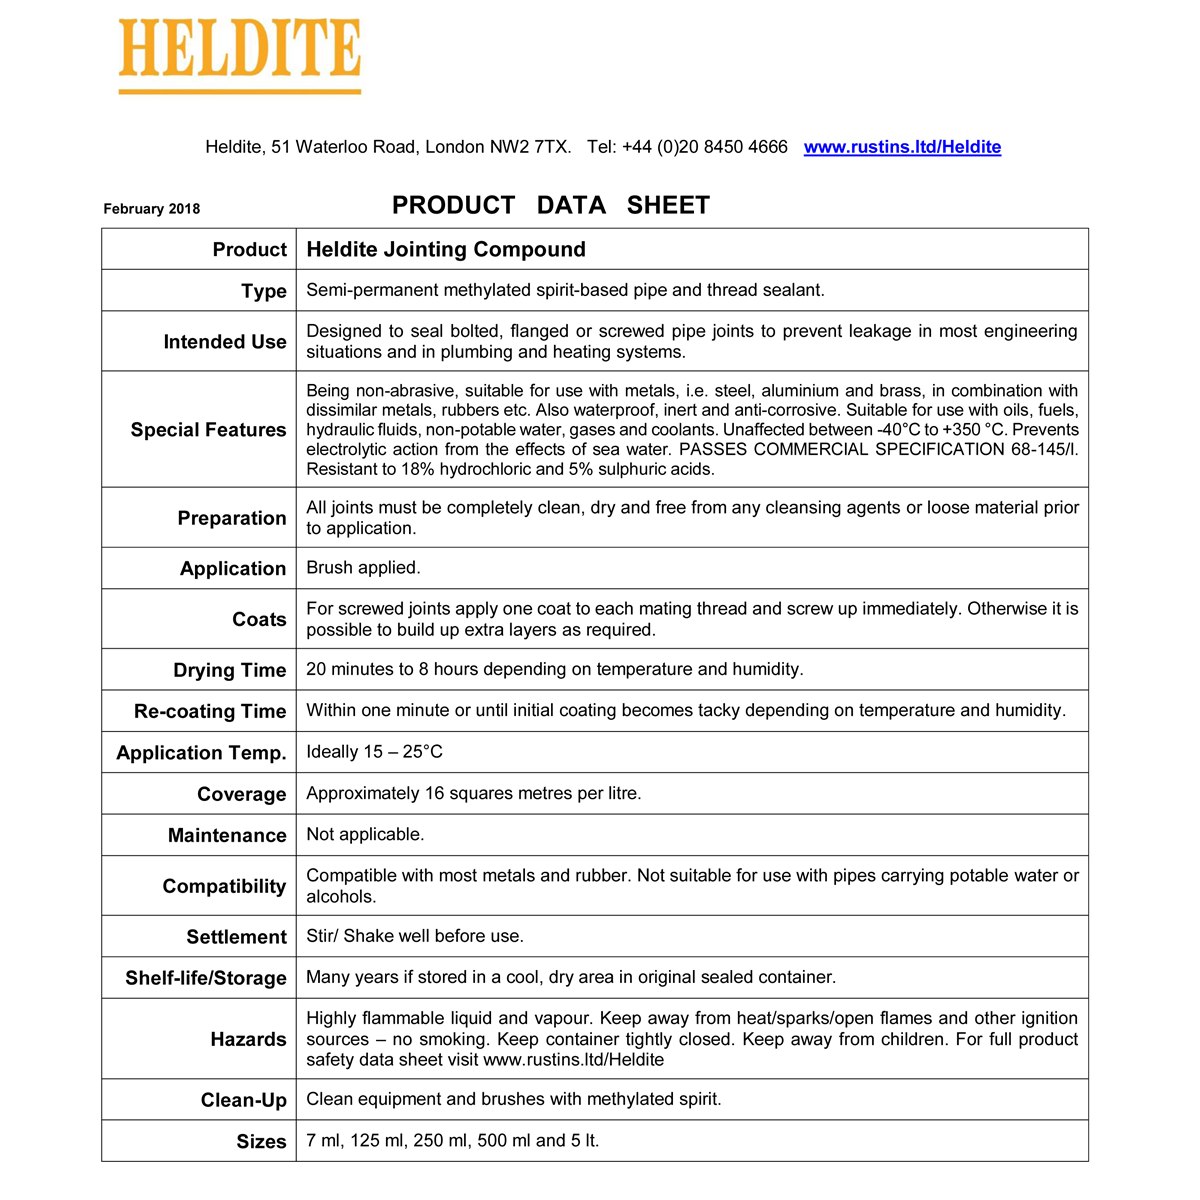 Heldite Jointing Compound Usage Instructions